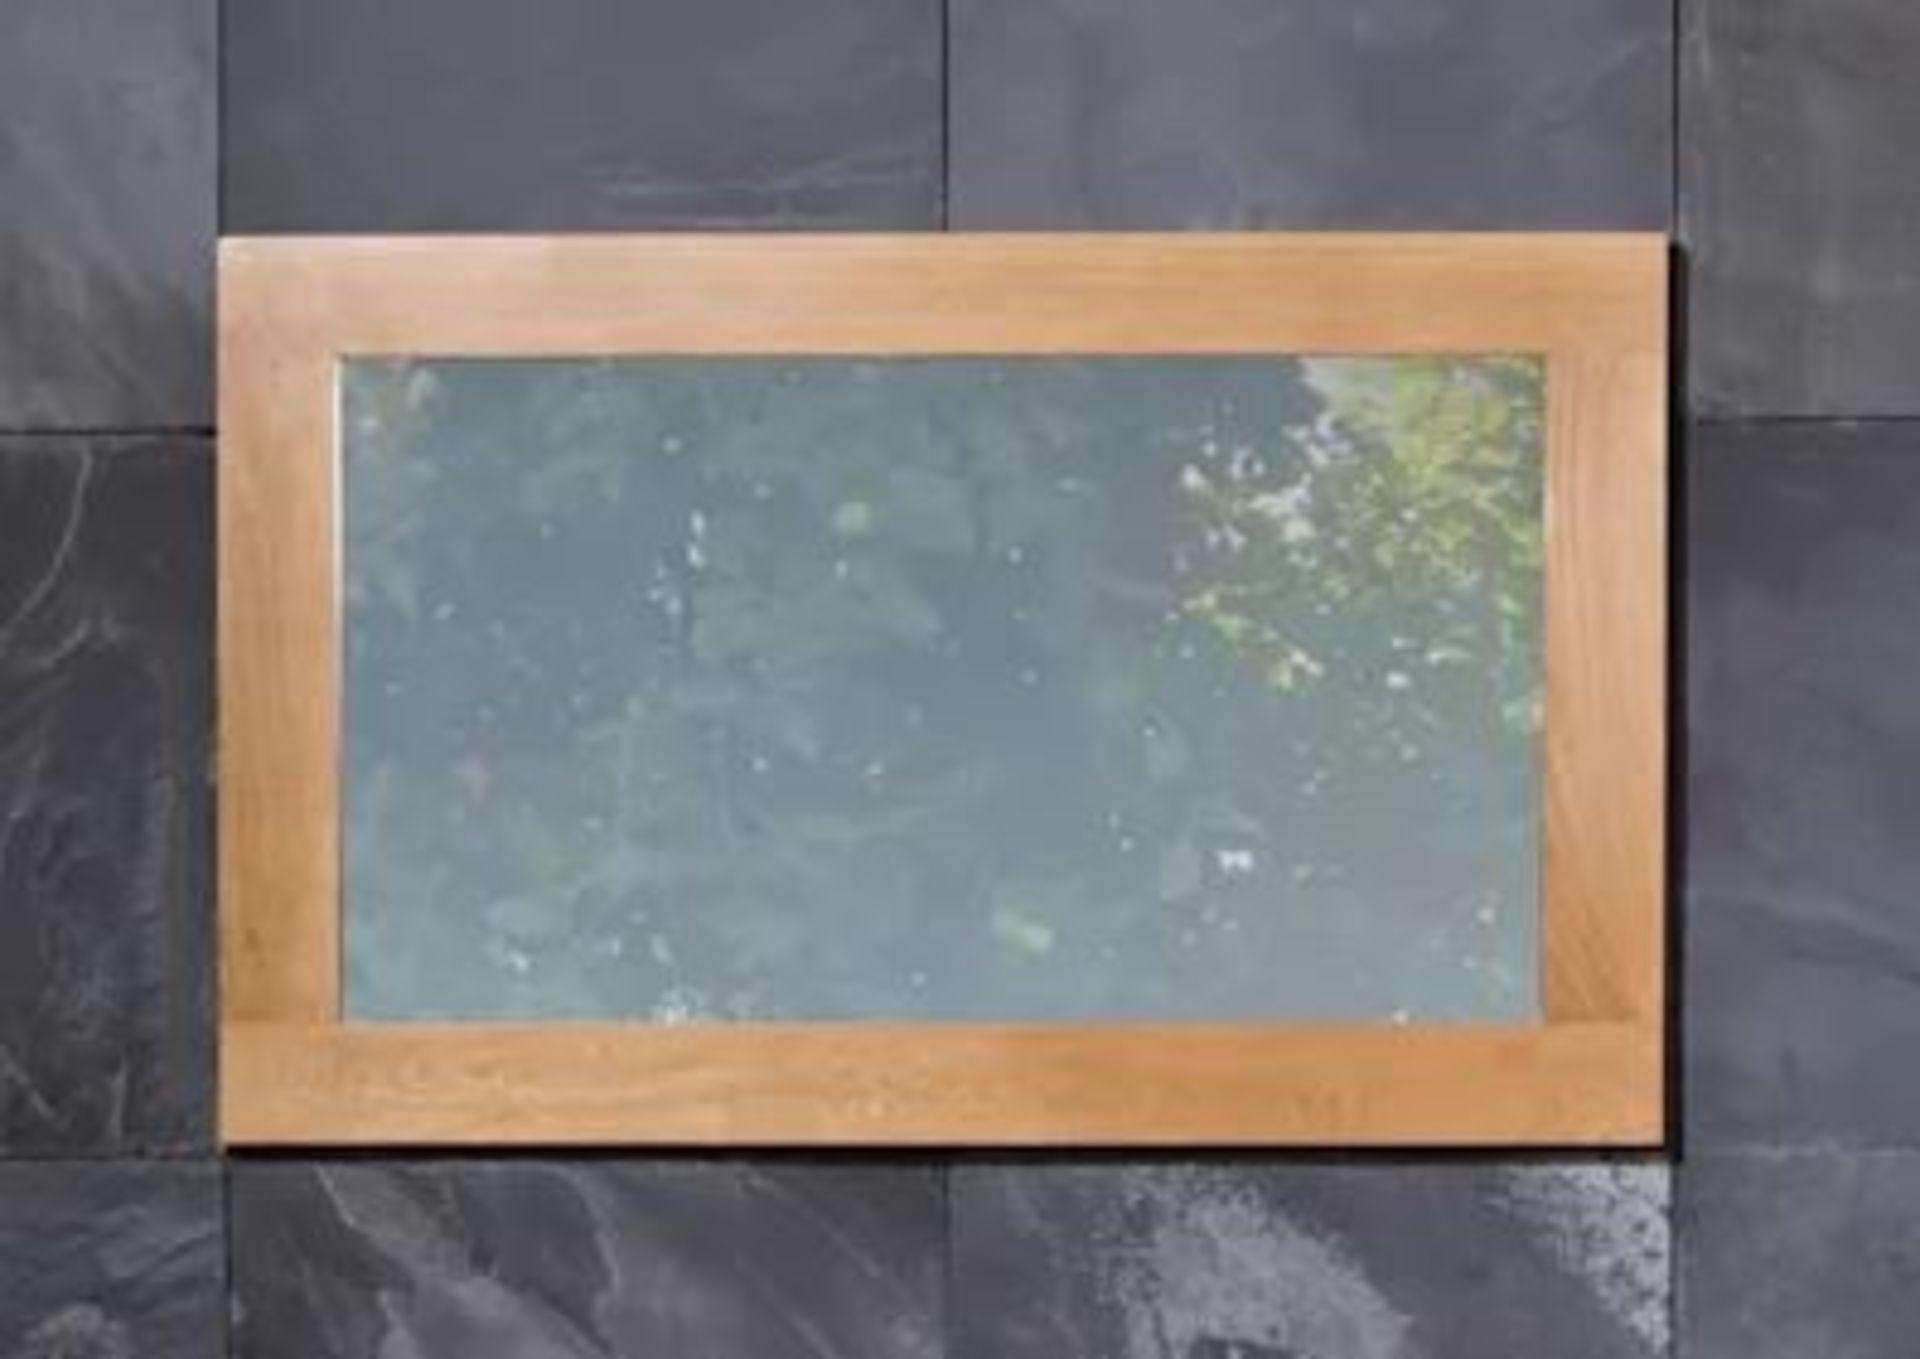 1 x Stonearth Large Bathroom Wall Mirror - American Solid Oak Frame With Bevelled Glass - Size: H750 - Image 7 of 12